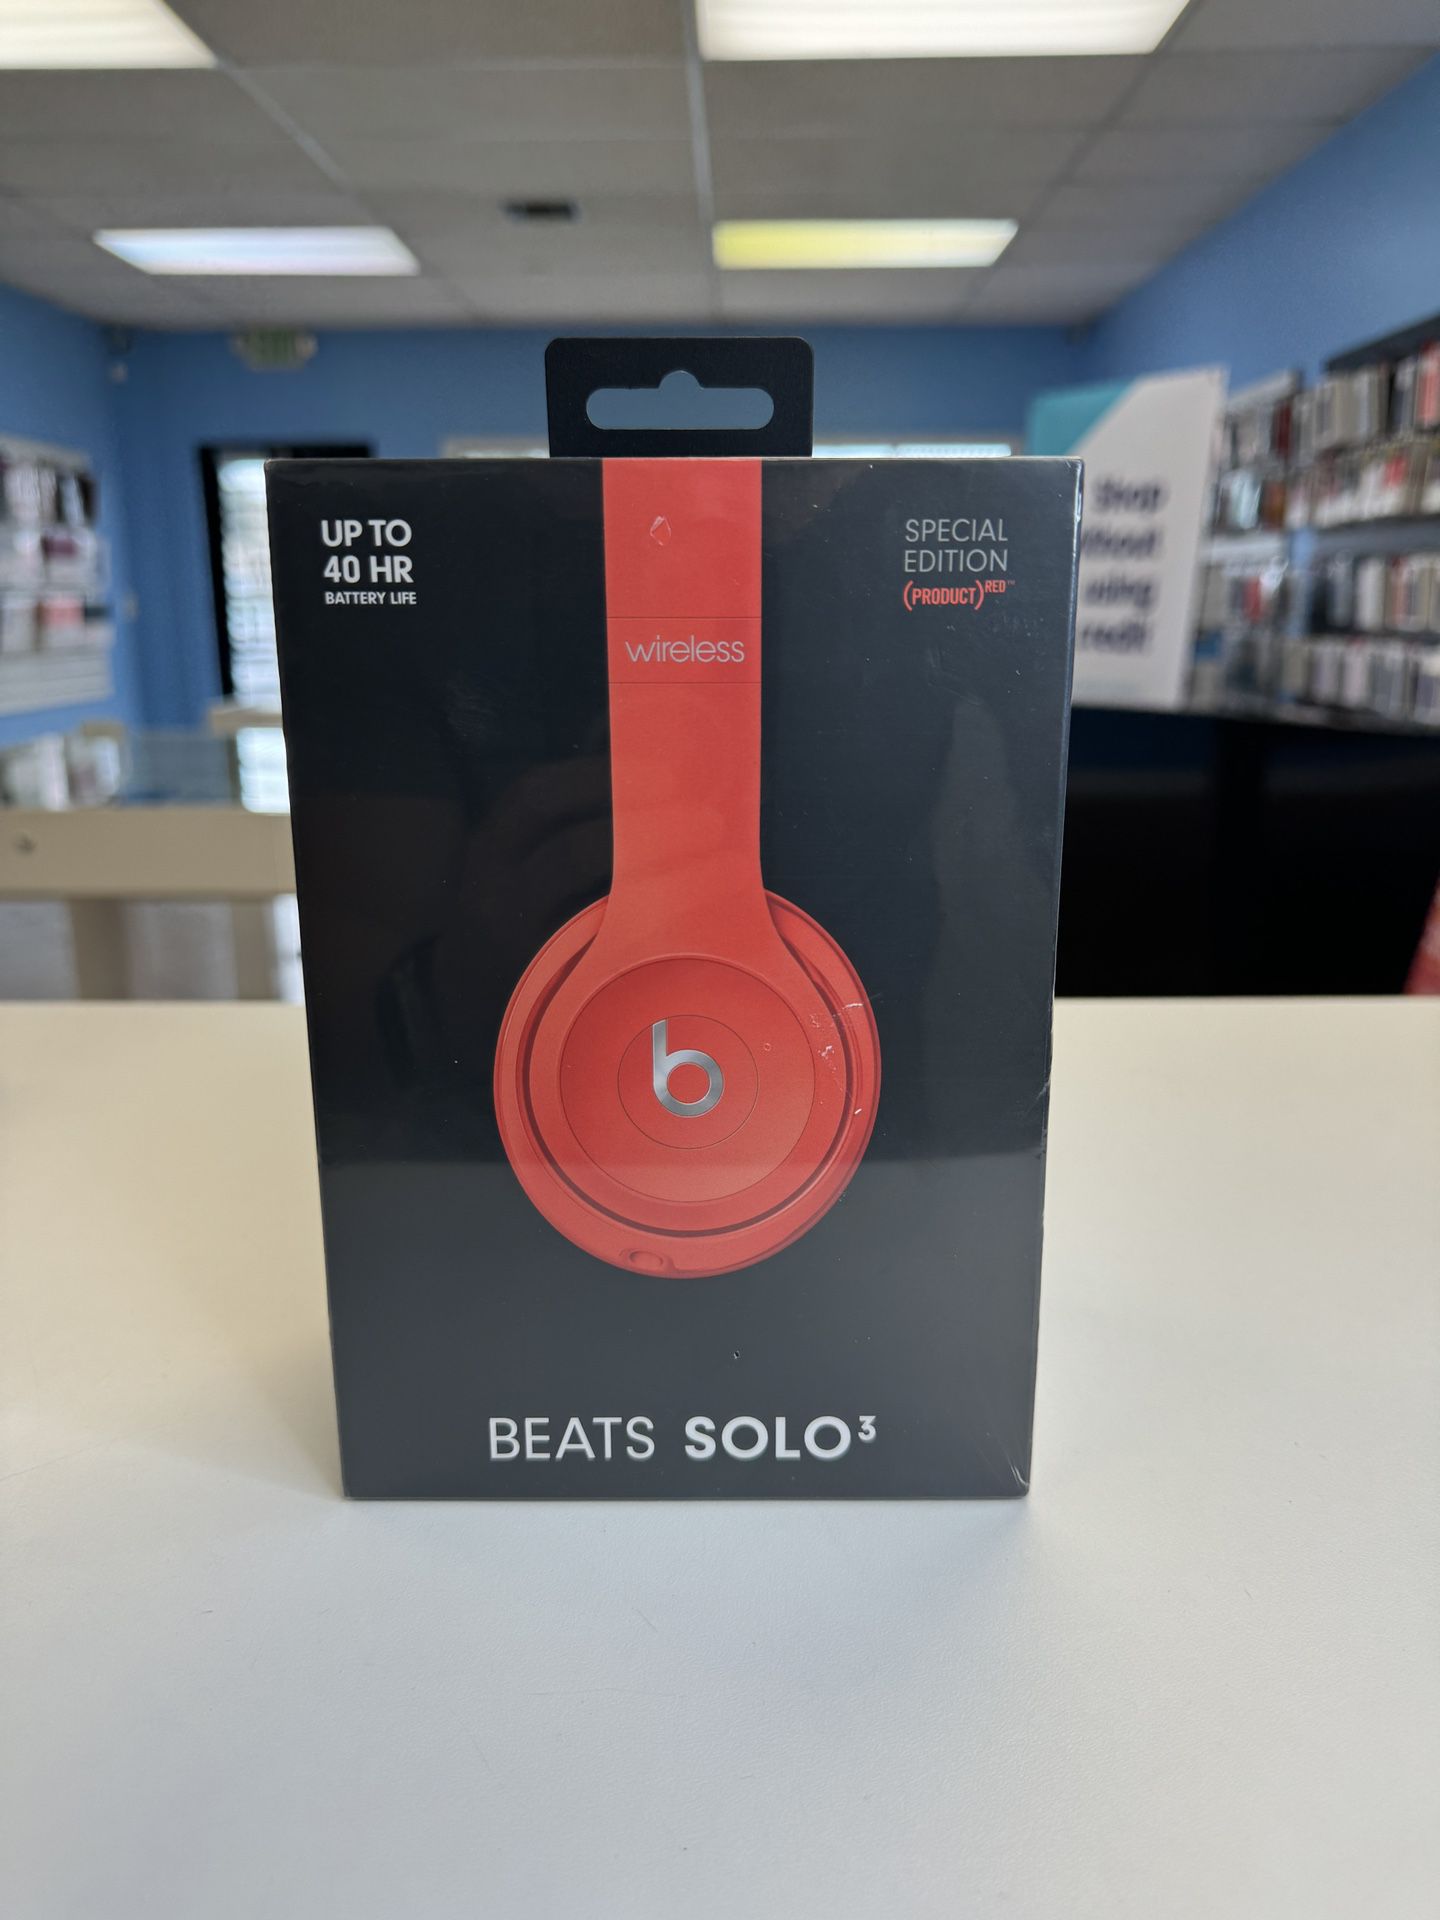 Beats by Dr. Dre Solo 3  SPECIAL EDITION (PRODUCT) Refld Color  Headphones is new sealed and comes With Apple Care Plus Till 2032